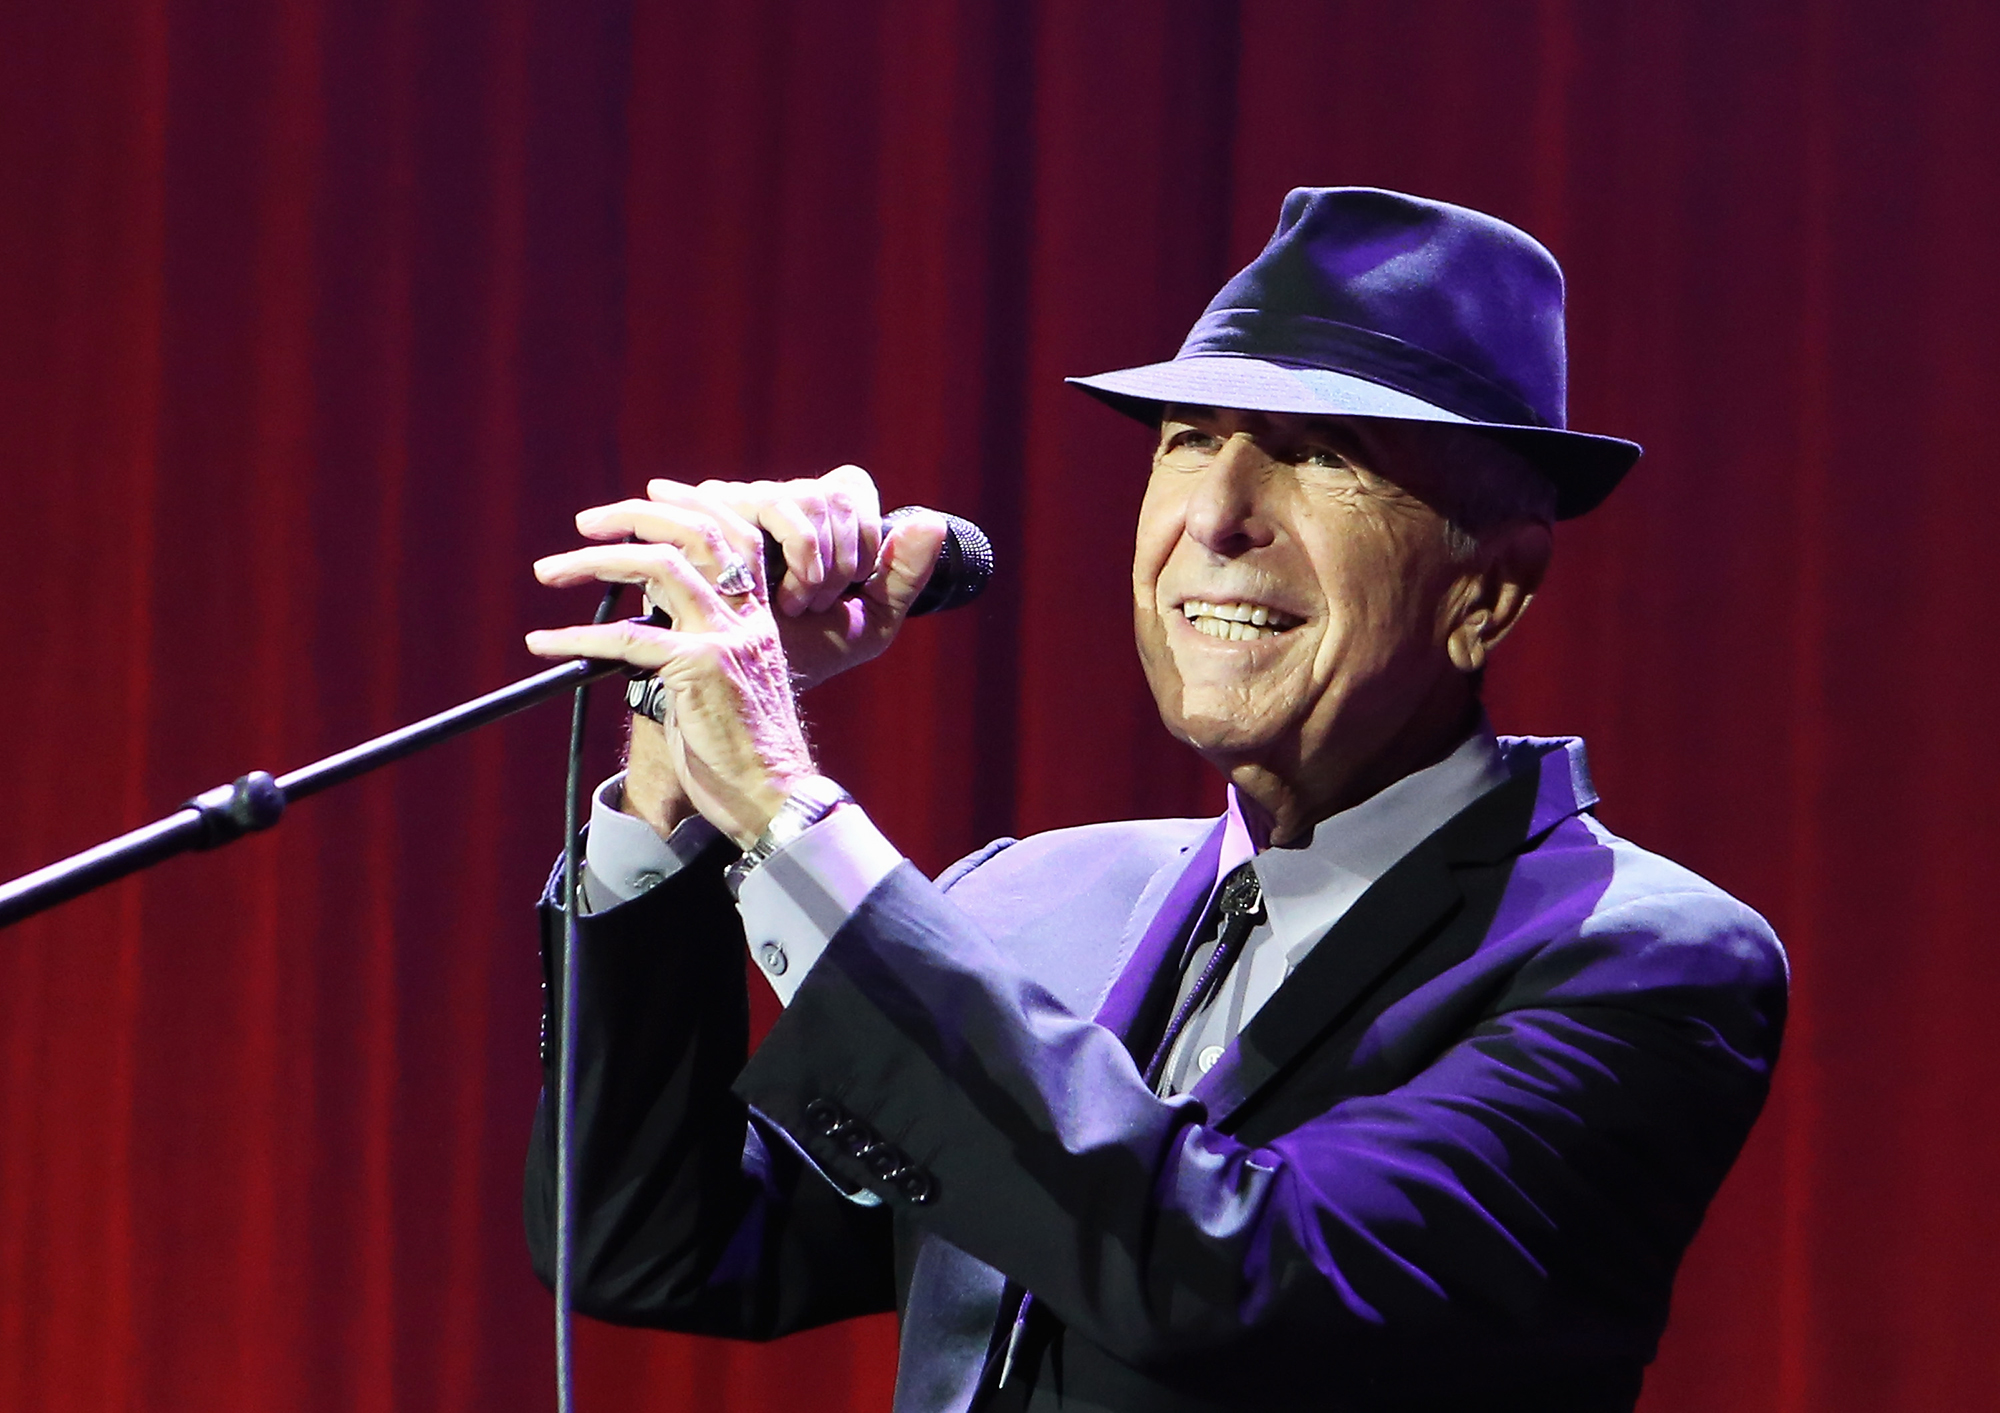 Leonard Cohen at the O2 Arena on Sept. 15, 2013 in London.